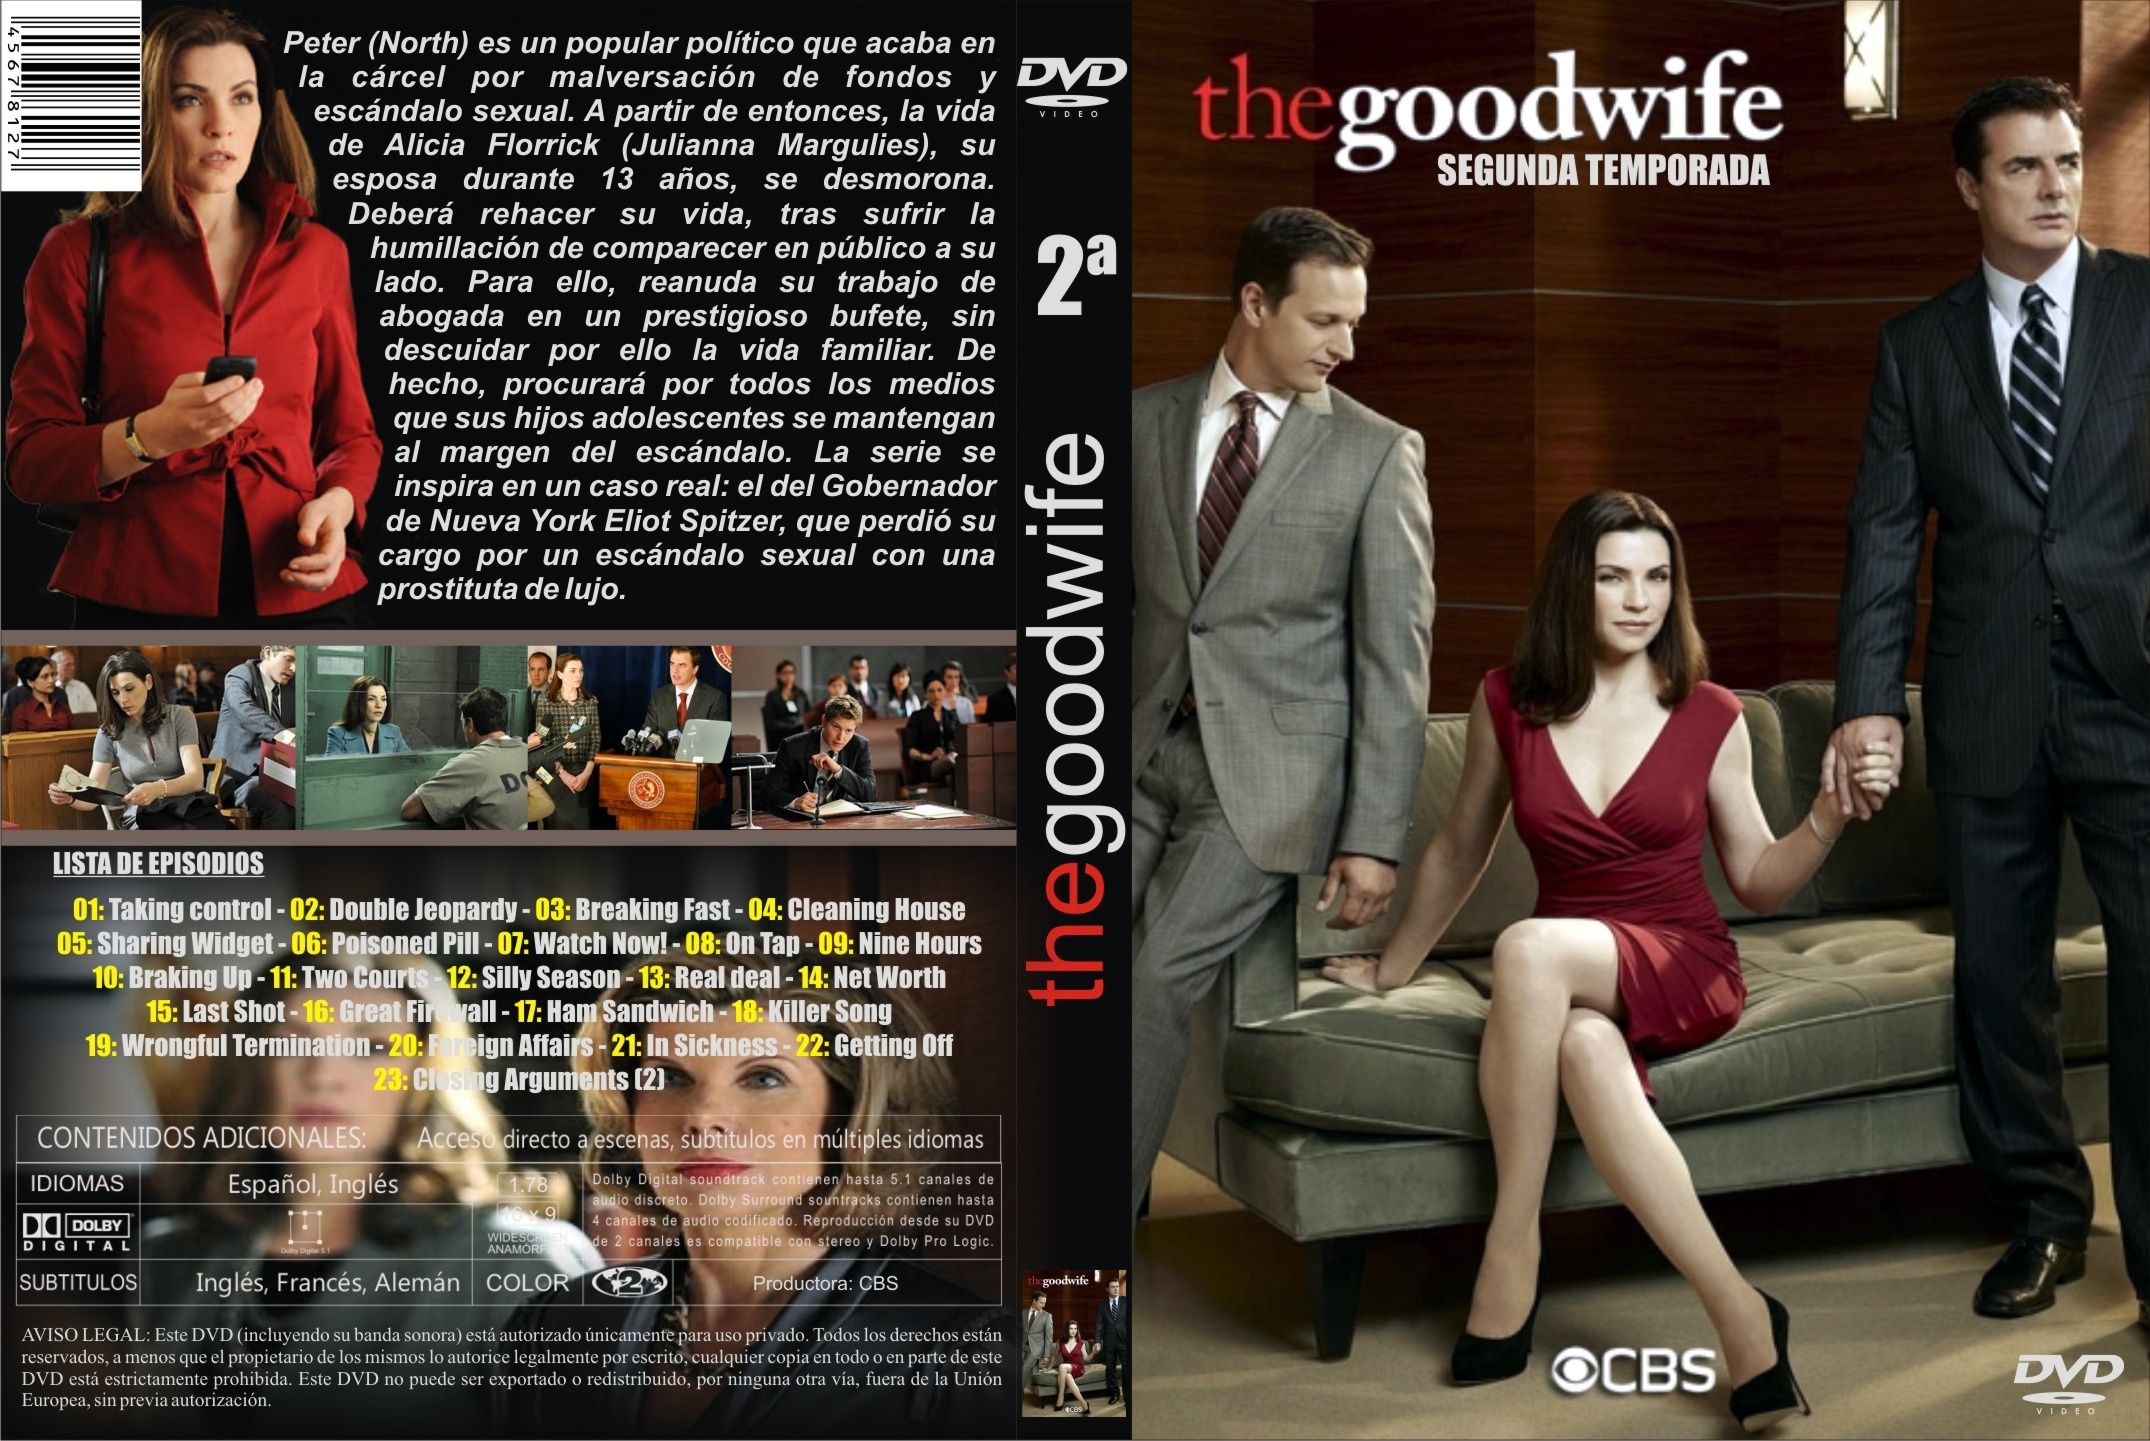 the good wife, Legal, Drama, Crime, Television, Good, Wife, Poster, Hd Wallpaper